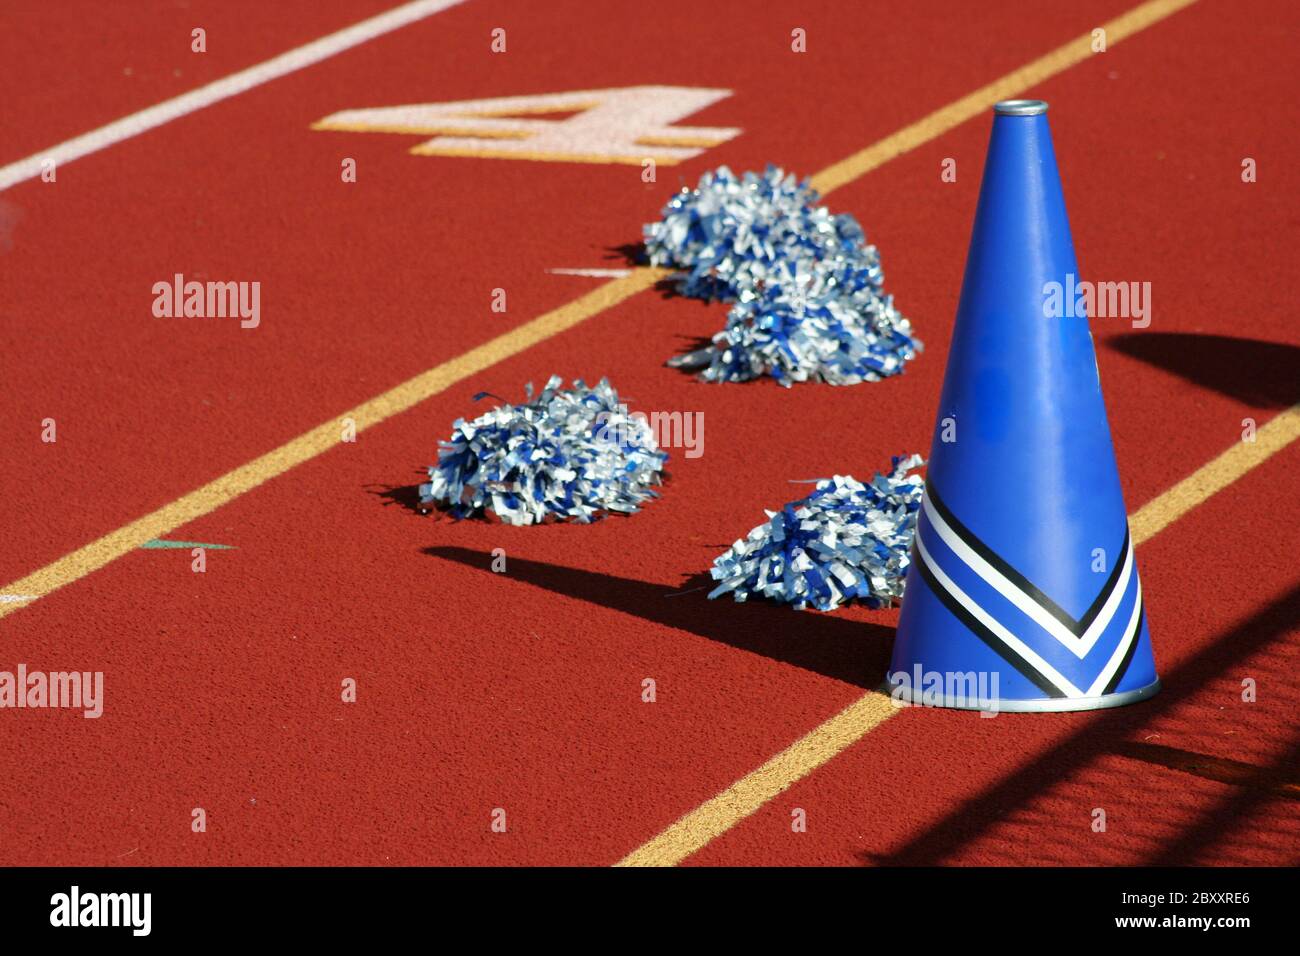 Cheerleader pom poms and megaphone at a football game Stock Photo